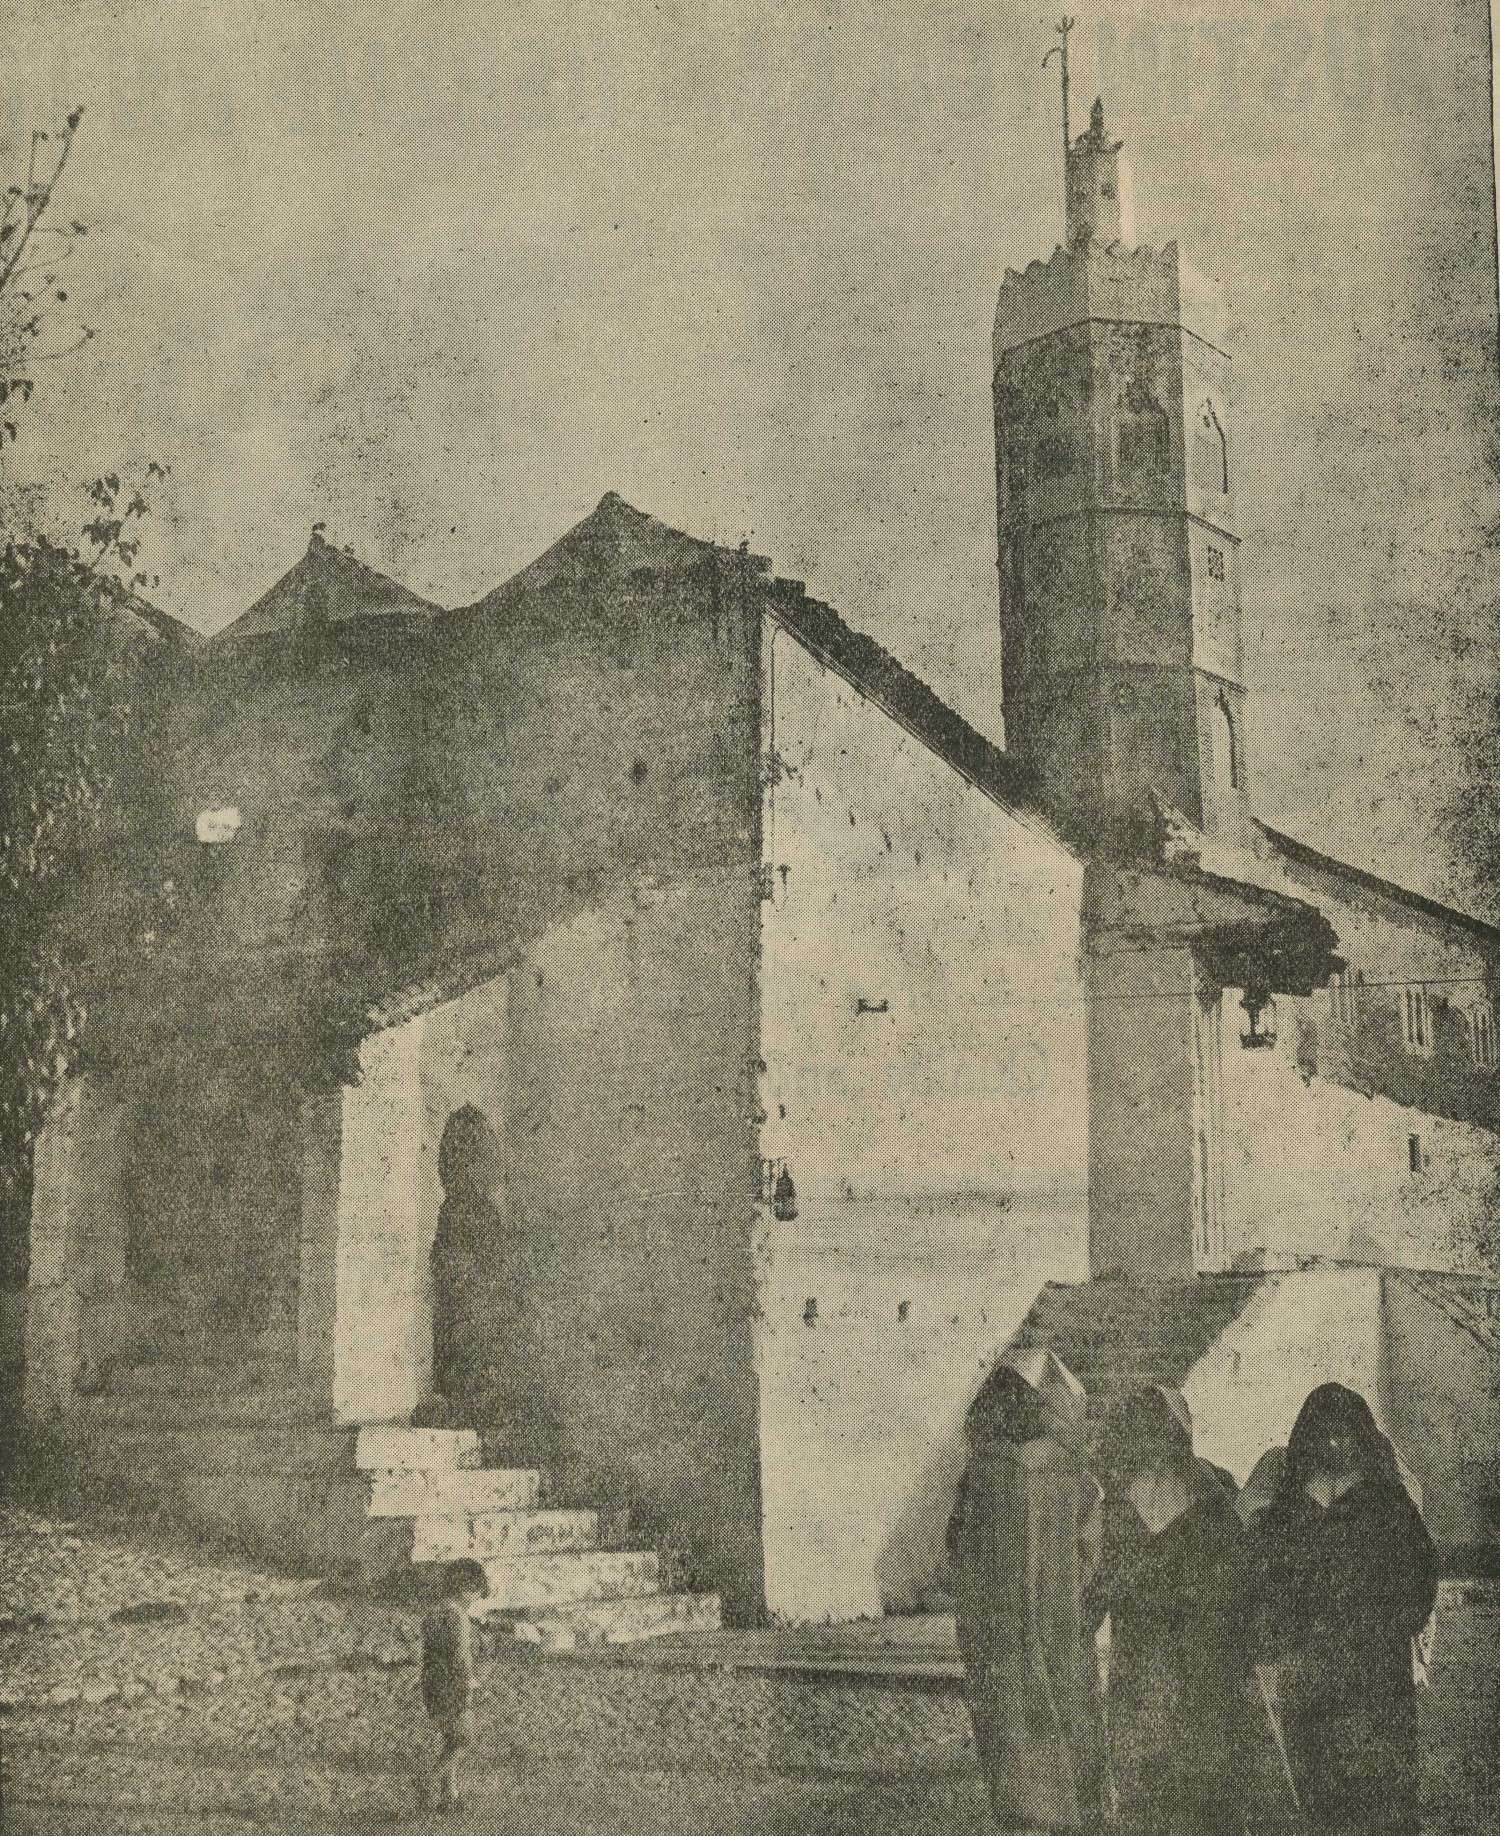 Jama' al-Kebir - Newspaper photo: Three men in djellabas and a child on the square outside the mosque with minaret, arched doorway at the steps. 